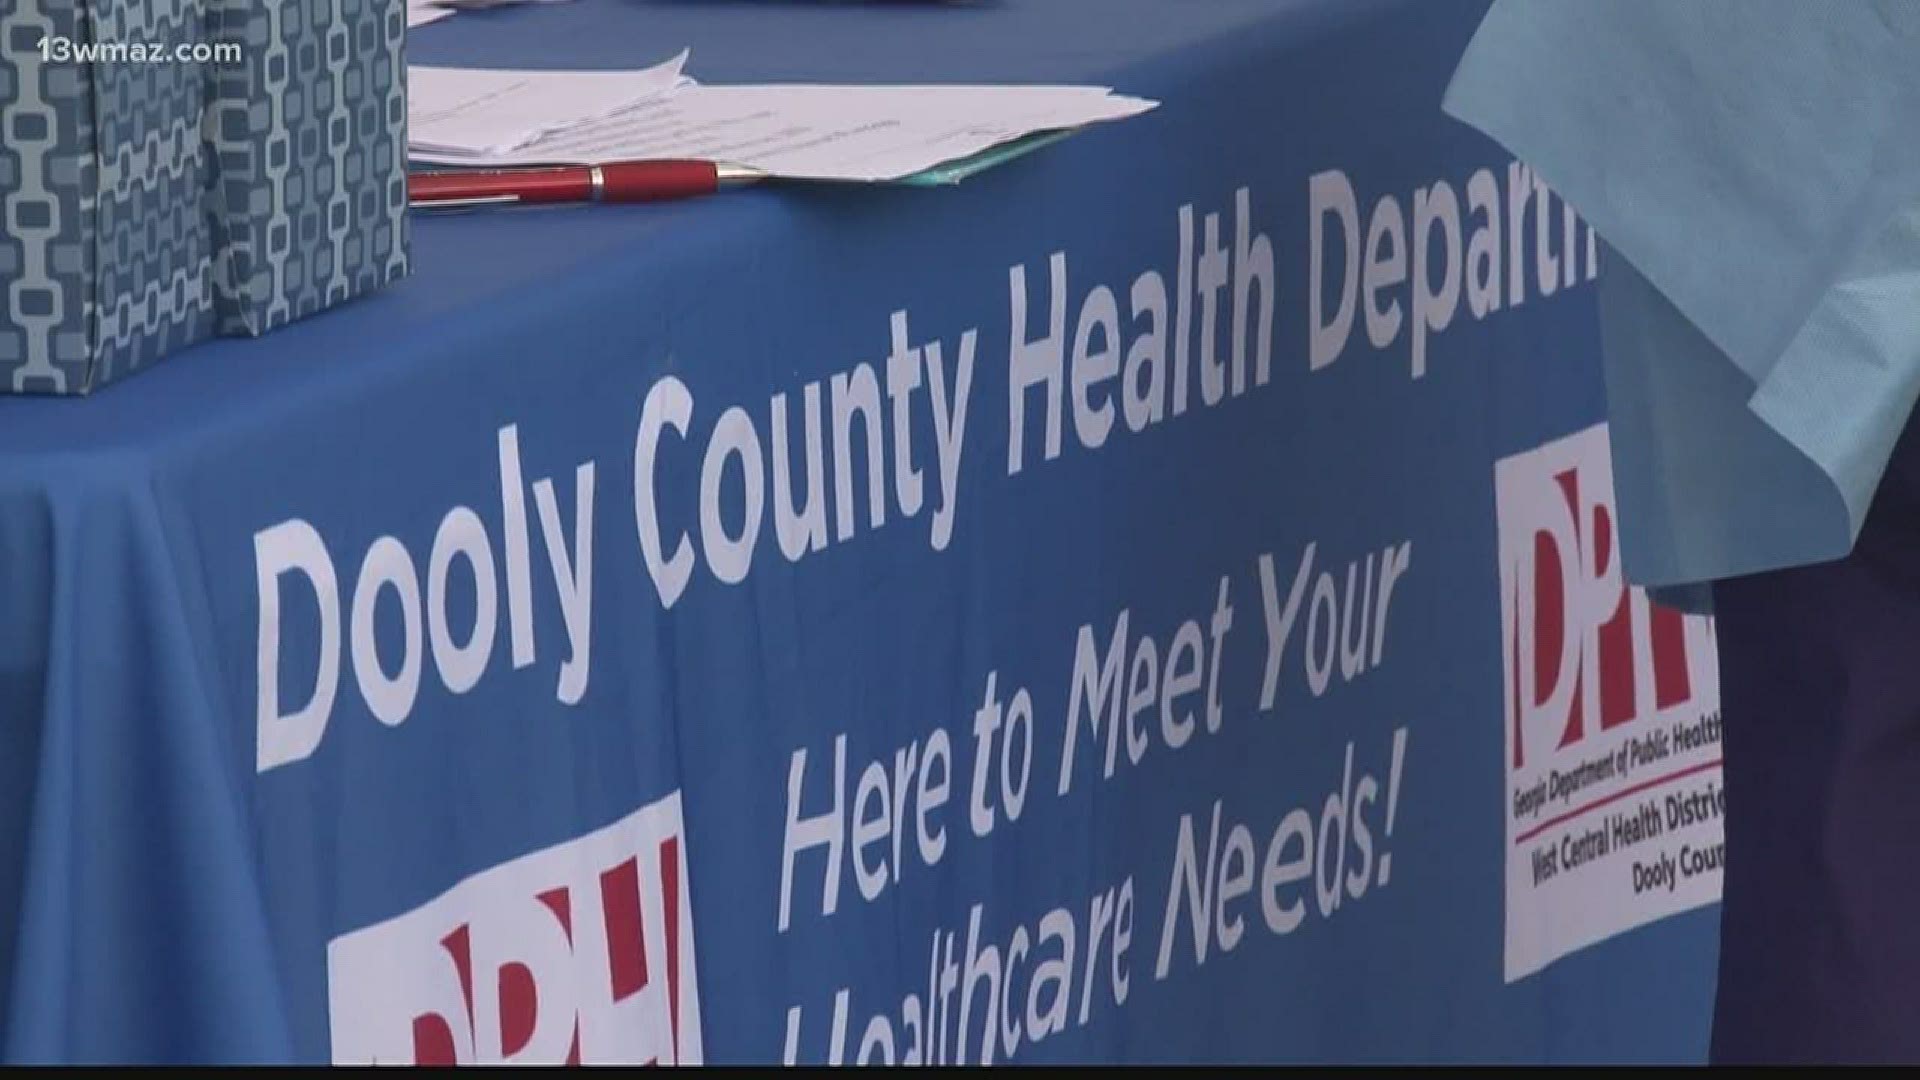 The West Central Health District reported its first 2 COVID-19 cases in Dooly County on March 30th. Just 2, weeks later that number jumped to above 50.